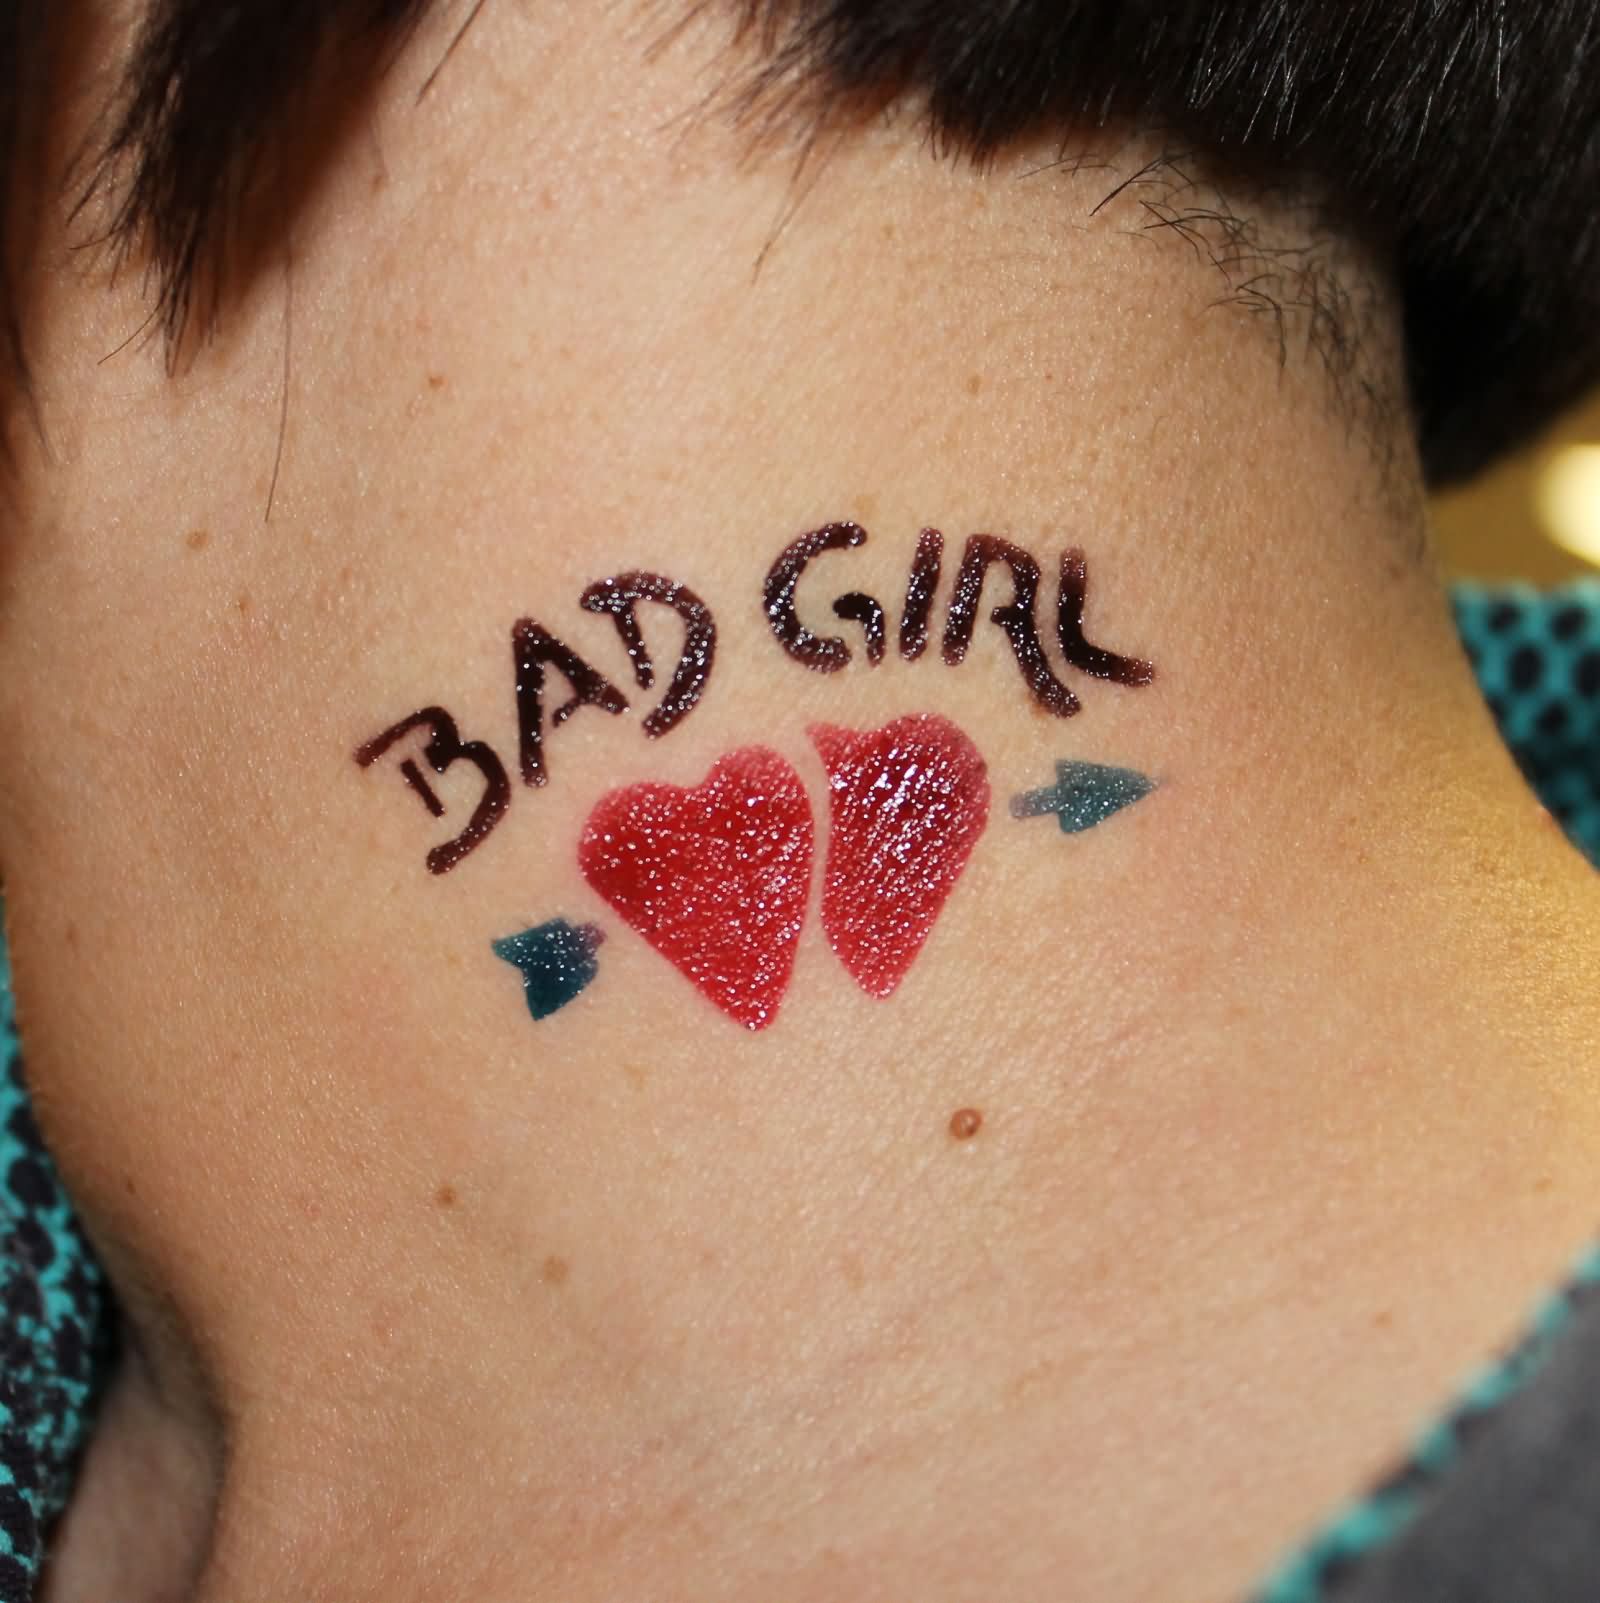 Bad Girl – Airbrush Arrow In Two Hearts Tattoo On Man Side Neck